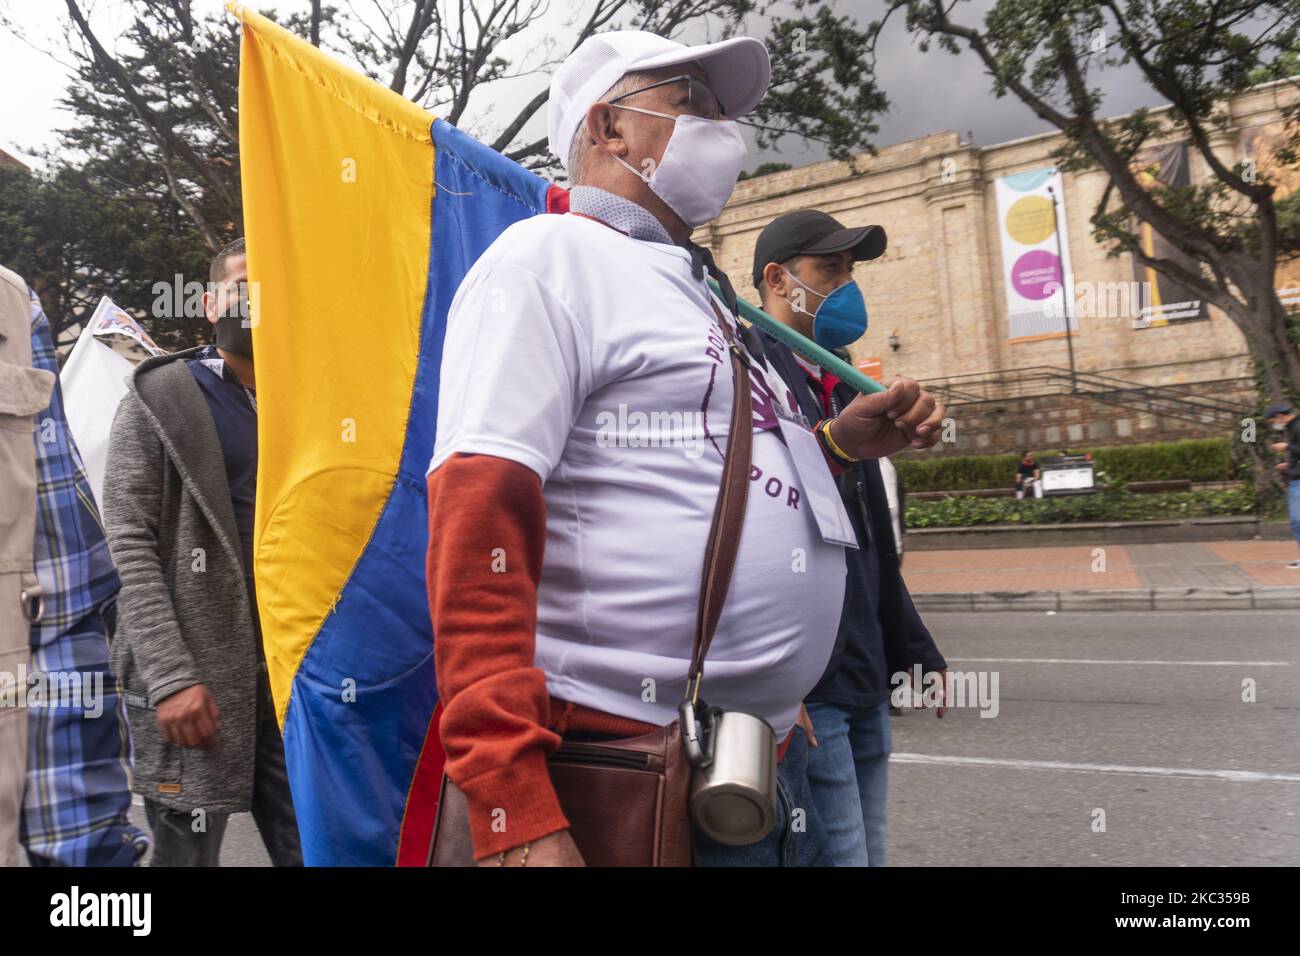 Former FARC guerrilla members take part in a demonstration demanding peace accords to be respected in front of the Colombian Supreme Court in Bogota on November 01, 2020 (Photo by Daniel Garzon Herazo/NurPhoto) Stock Photo